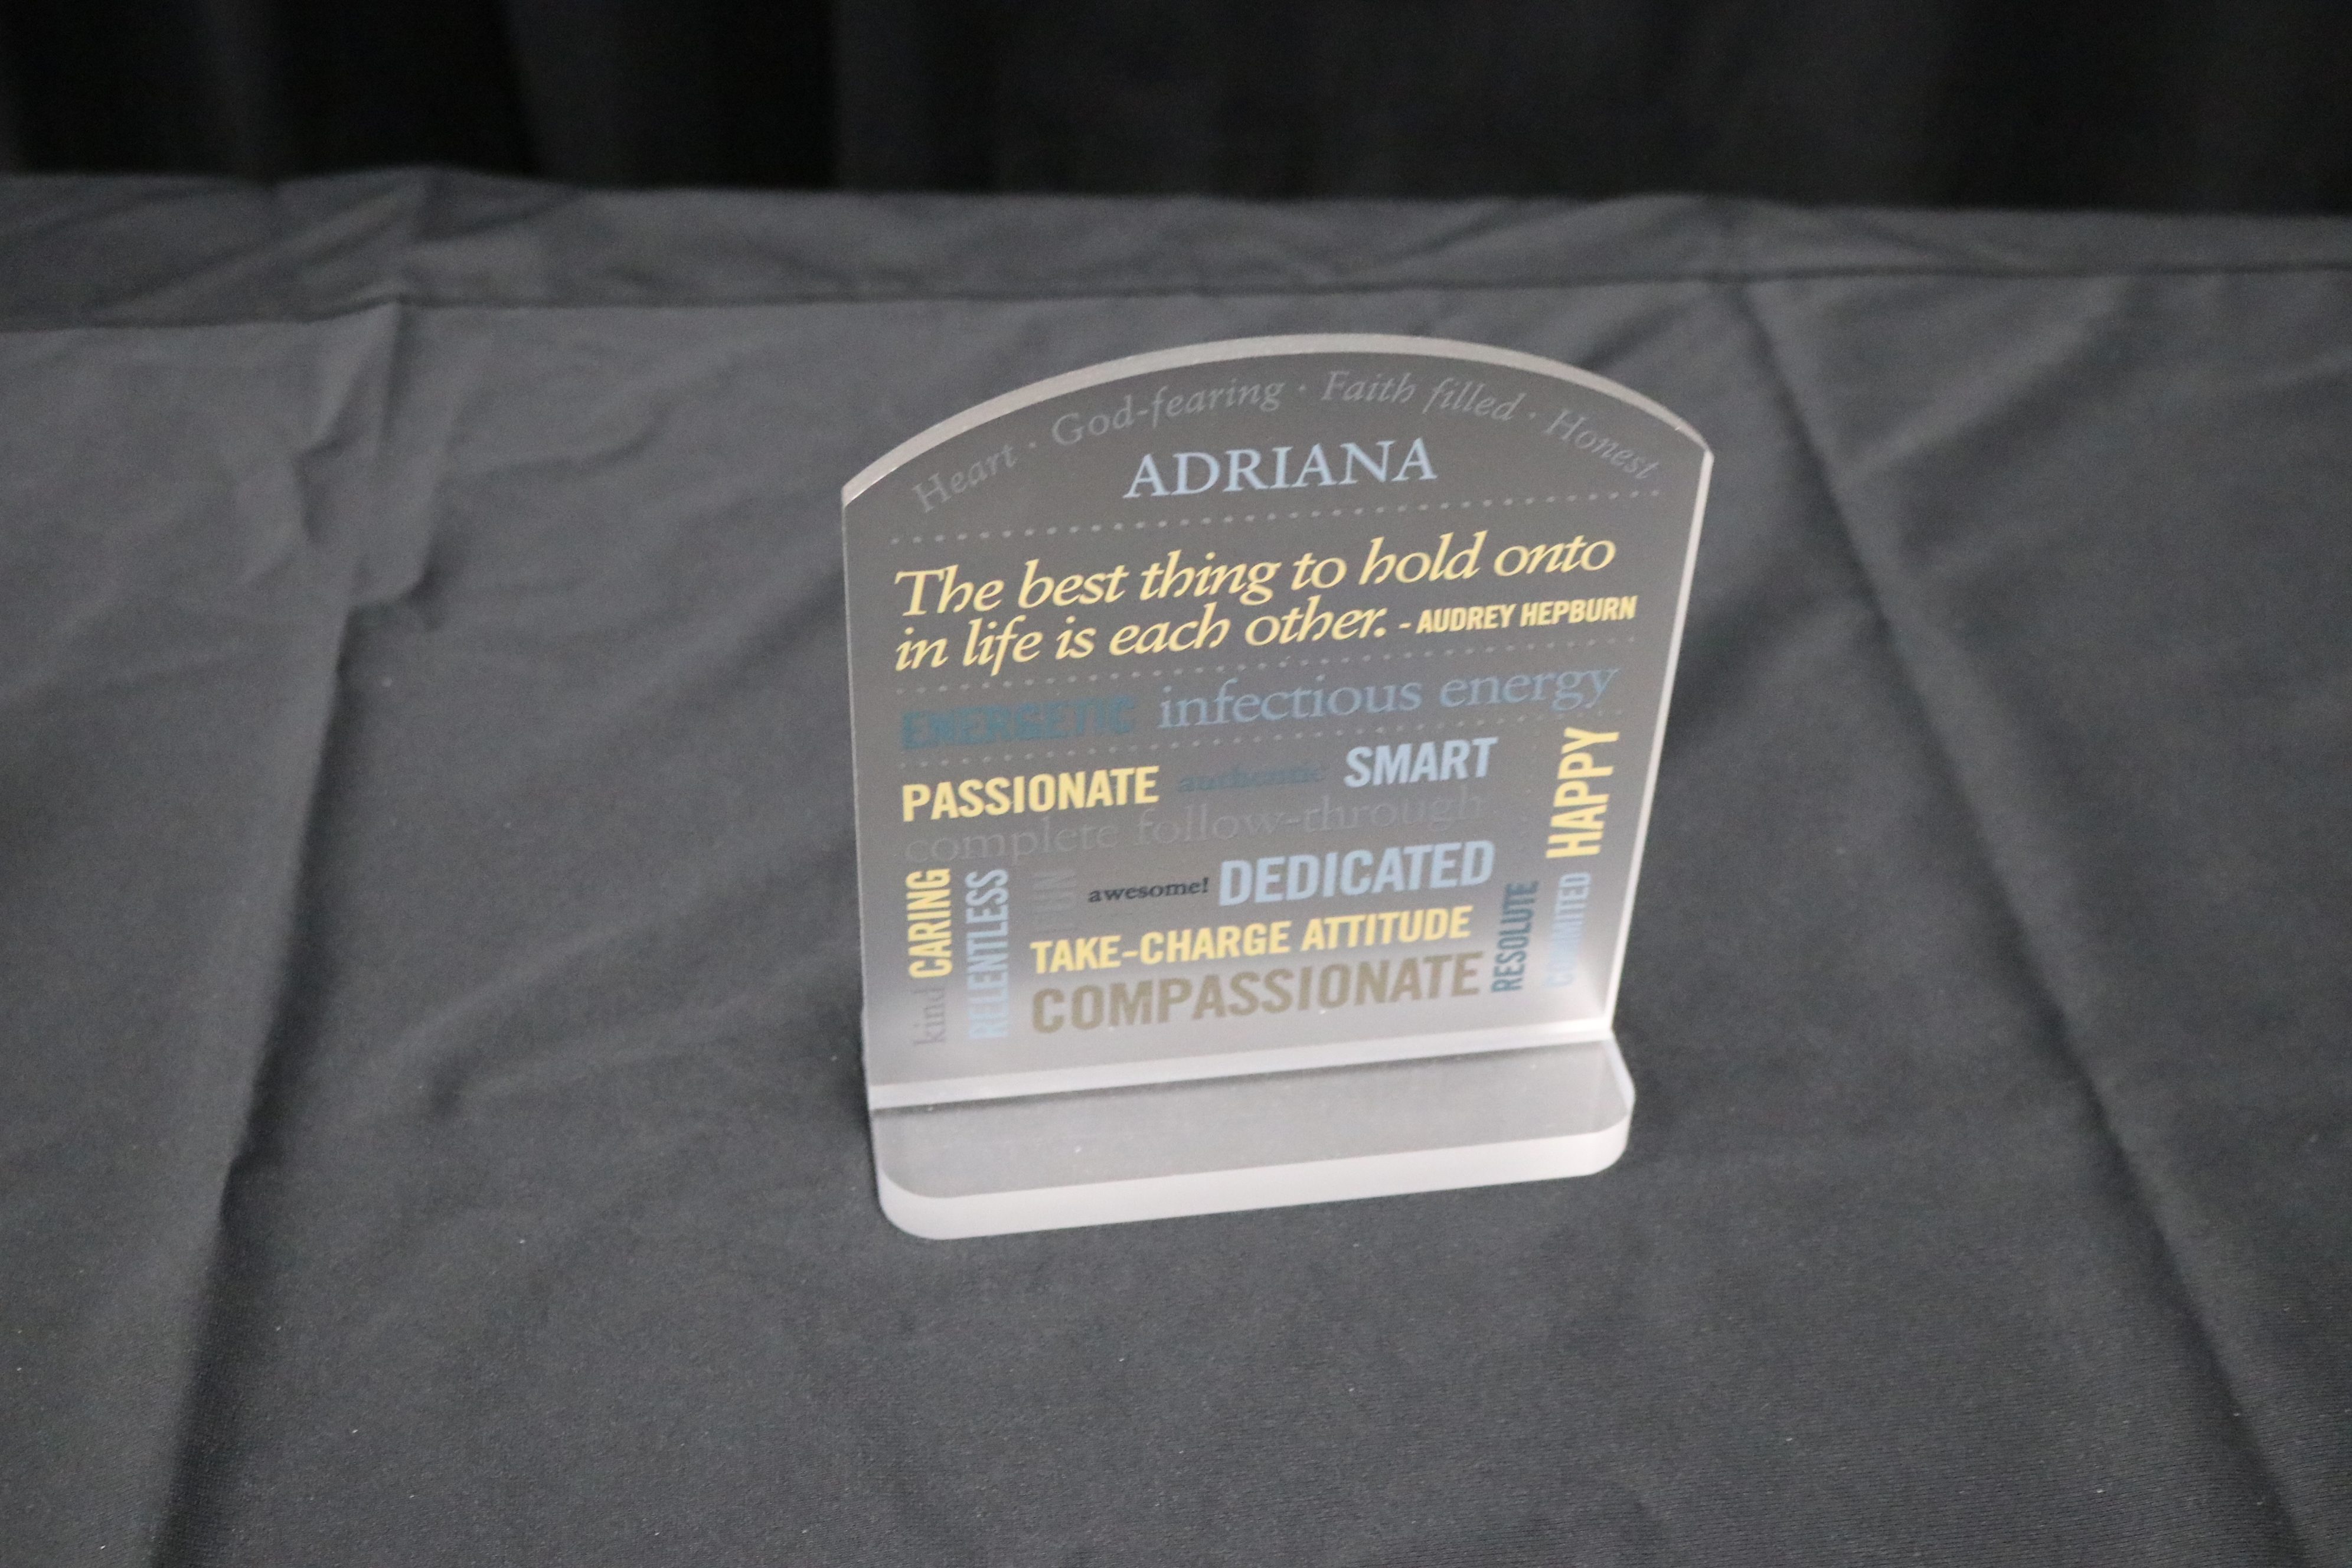 Frosted acrylic Tabletop award for teammate with characteristic words printed on award.